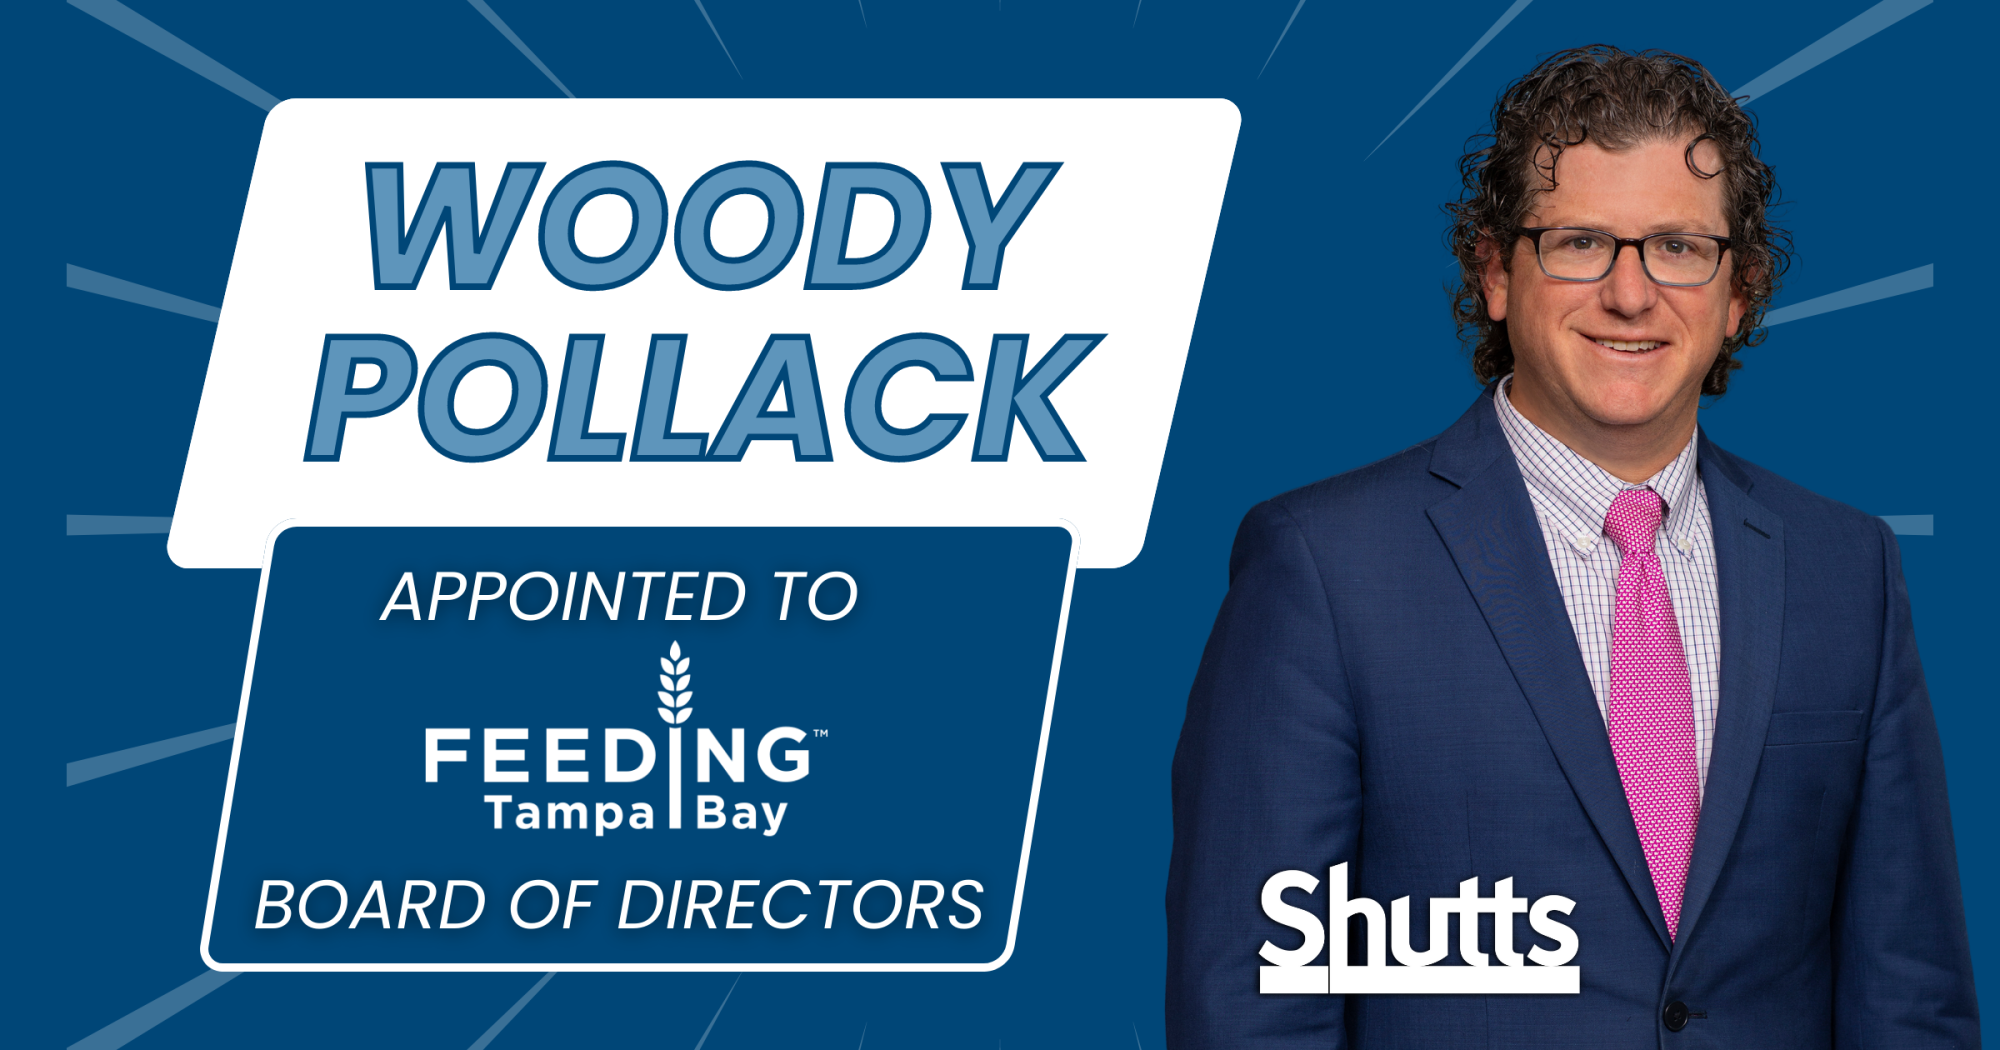 Woody Pollack Appointed to Feeding Tampa Bay Board of Directors